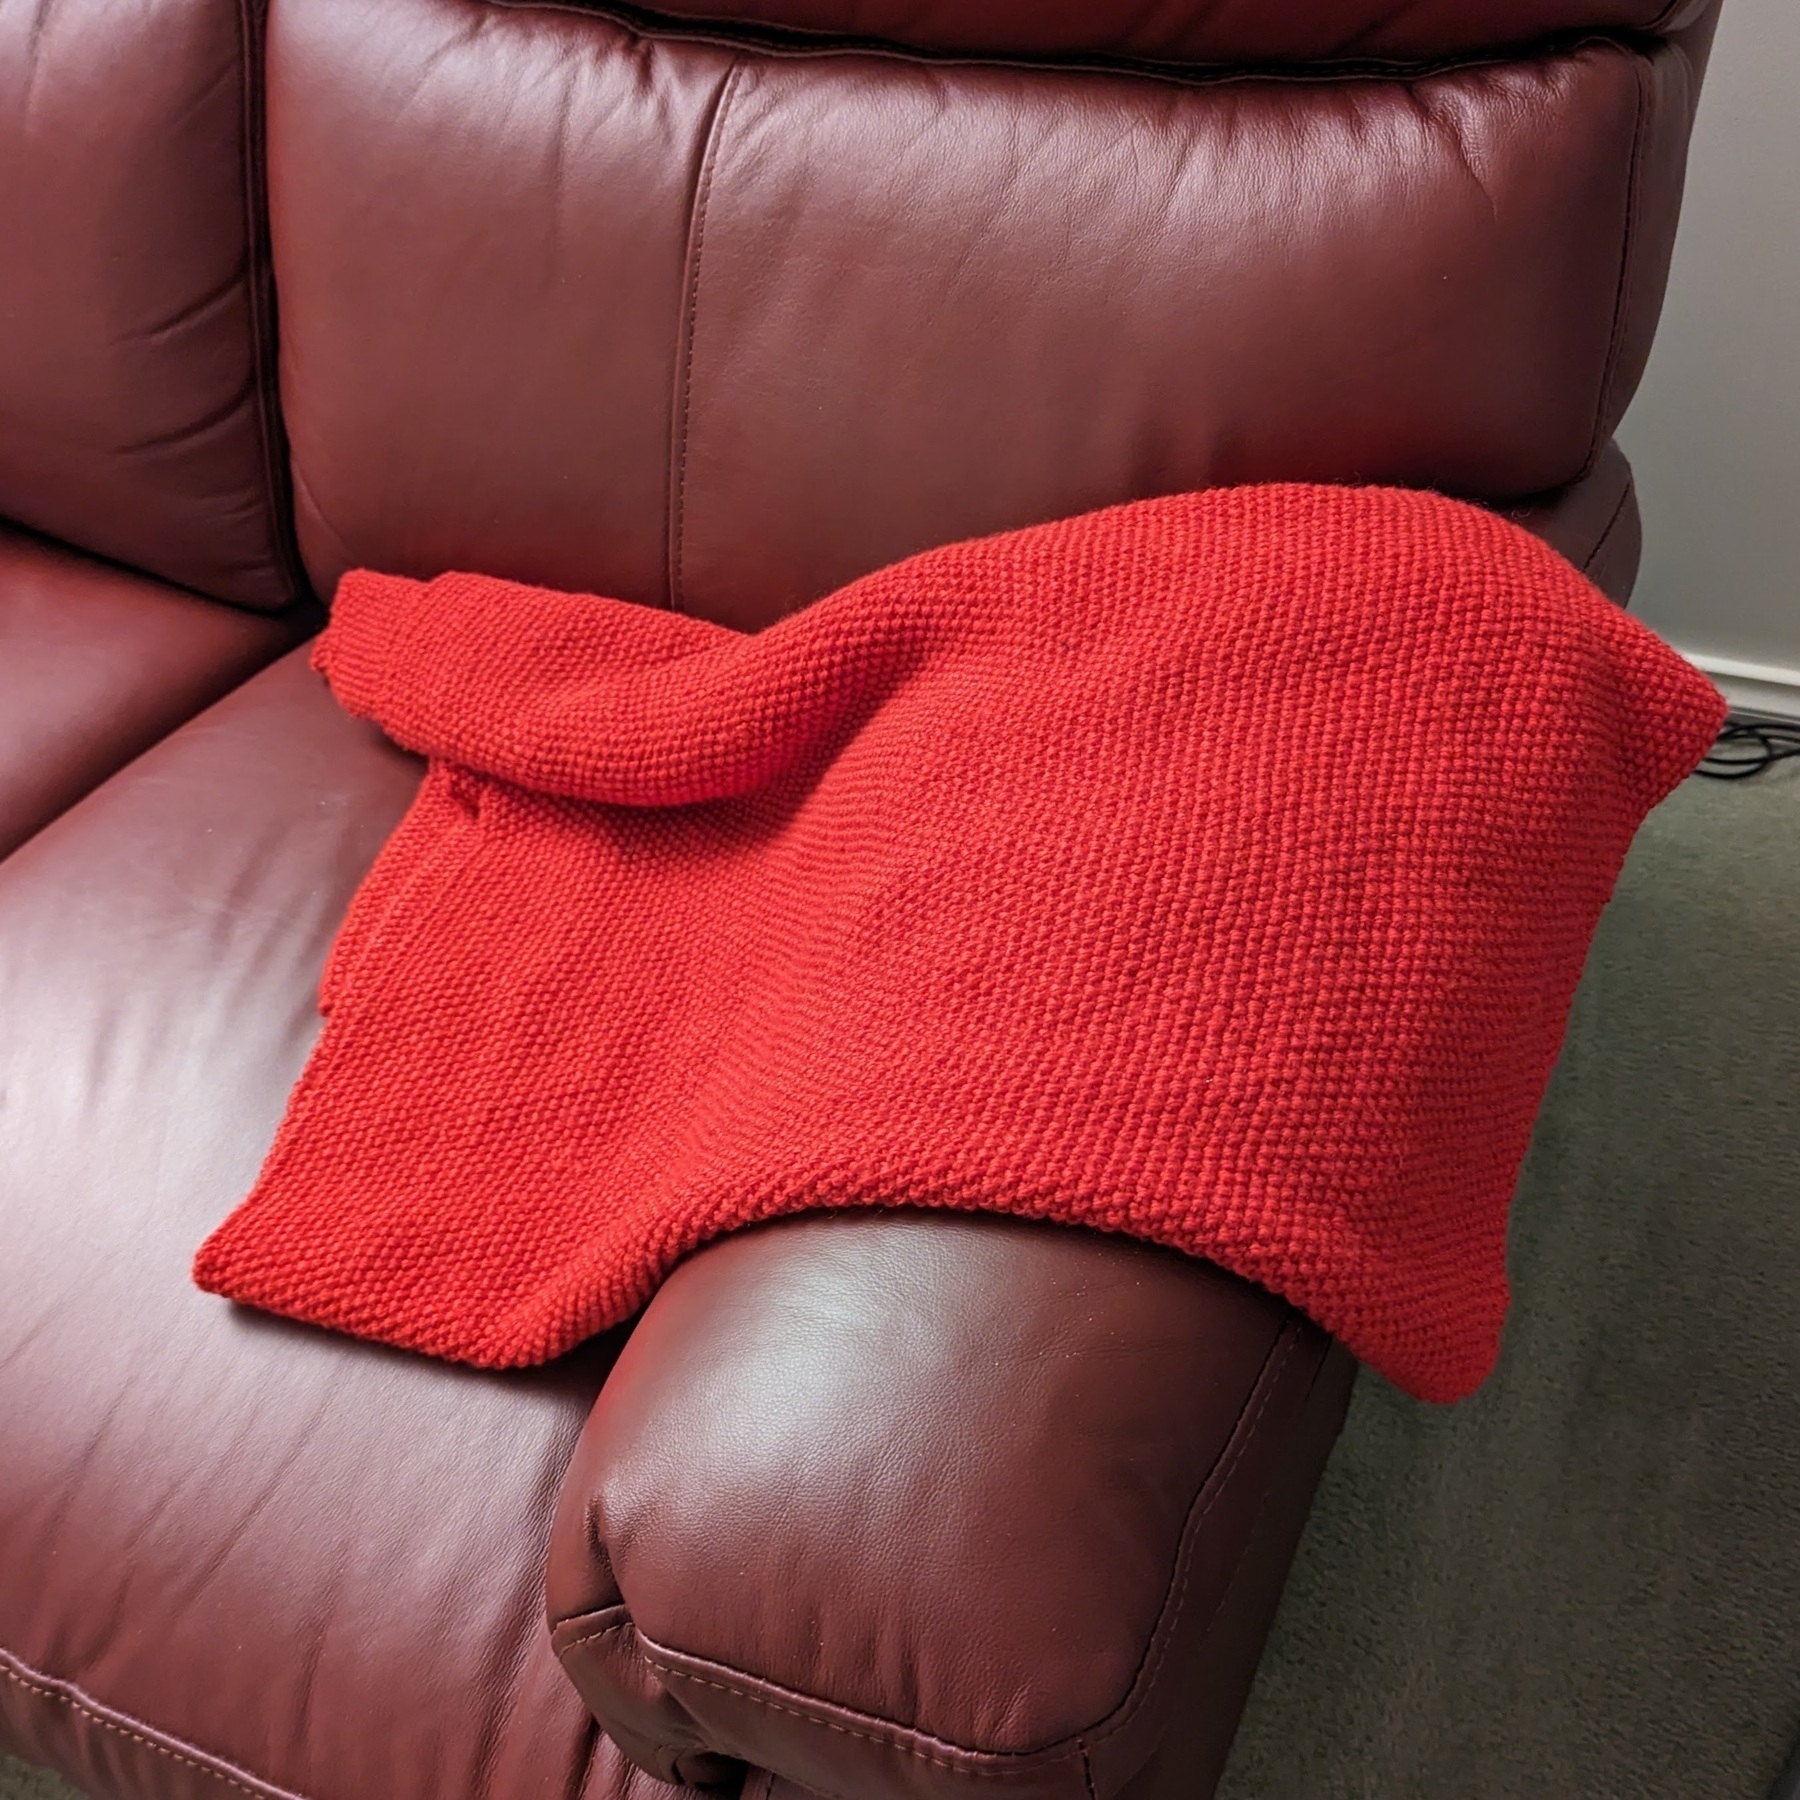 Red blanket draped on the arm of a burgundy couch